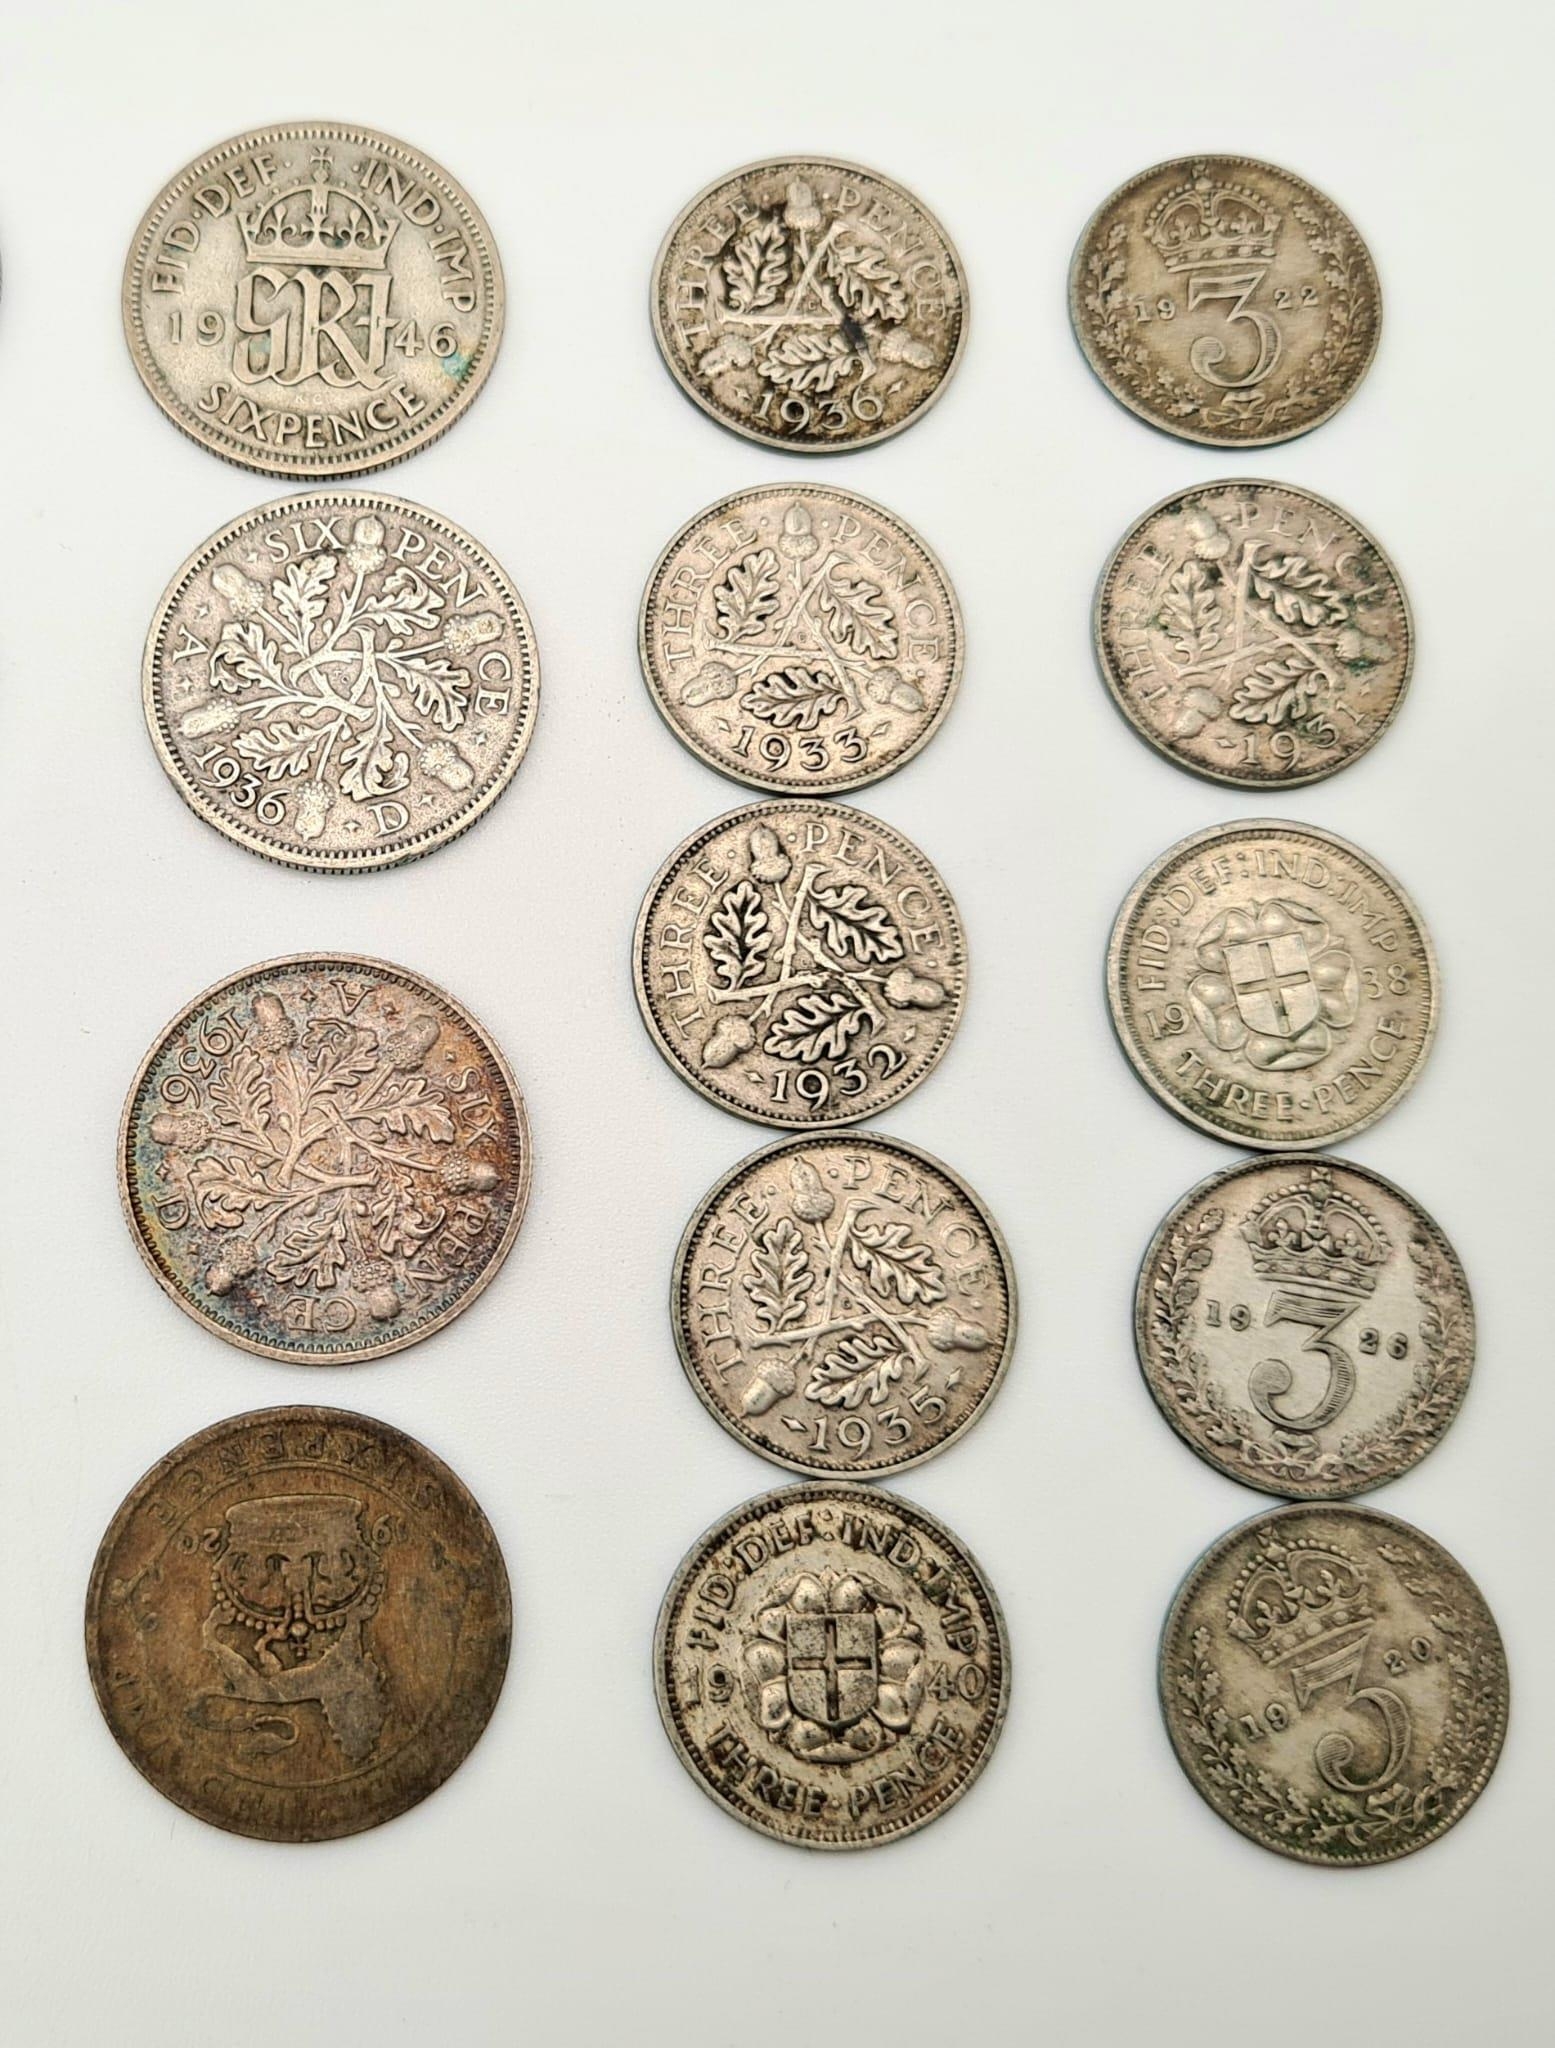 A Selection of Vintage Silver (.500) English Coins. Please see photos for conditions. 185g total